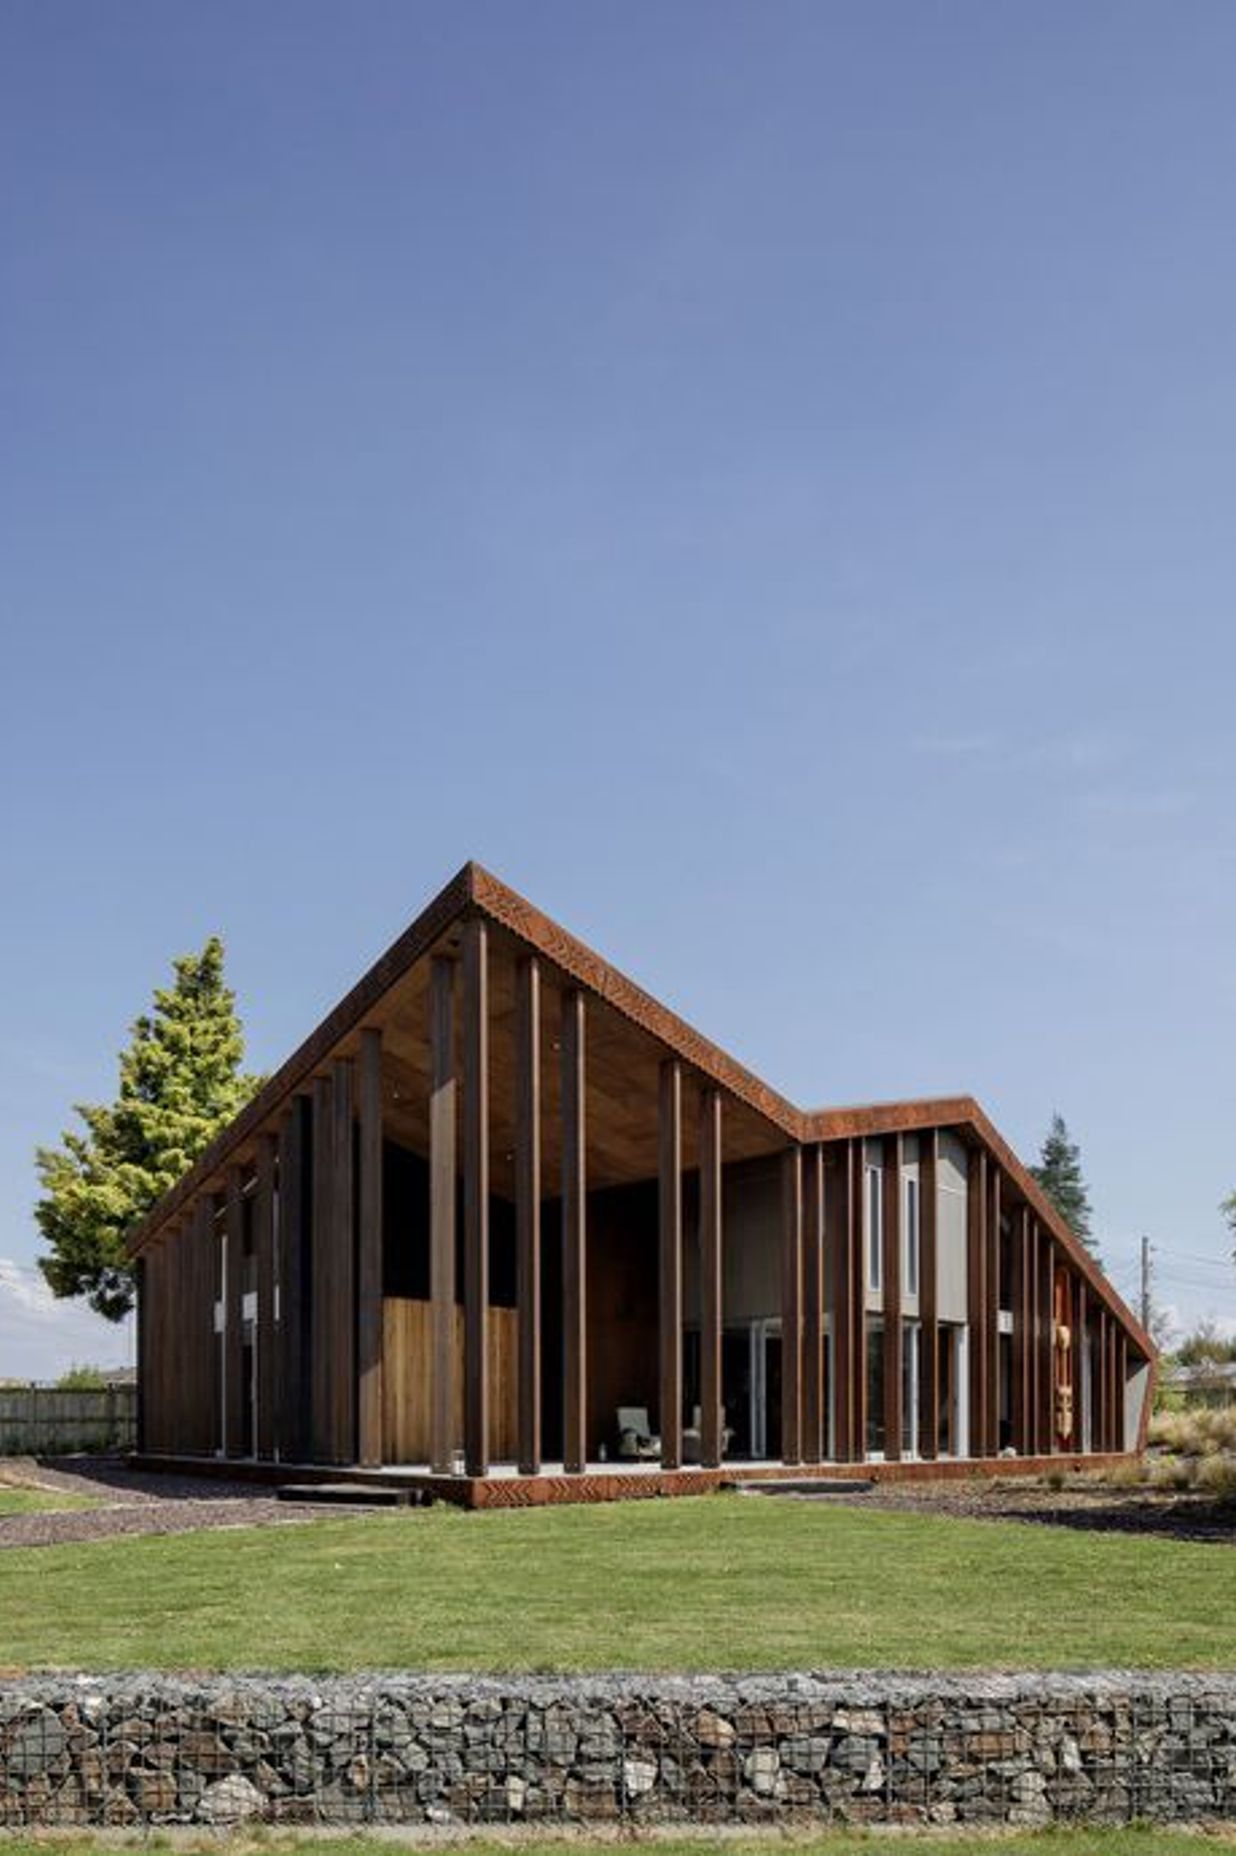 Look up to see a plywood-panelled soffit which features overlapping pattern work. Vertical columns are reminiscent of looking through tree trunks in a forest.